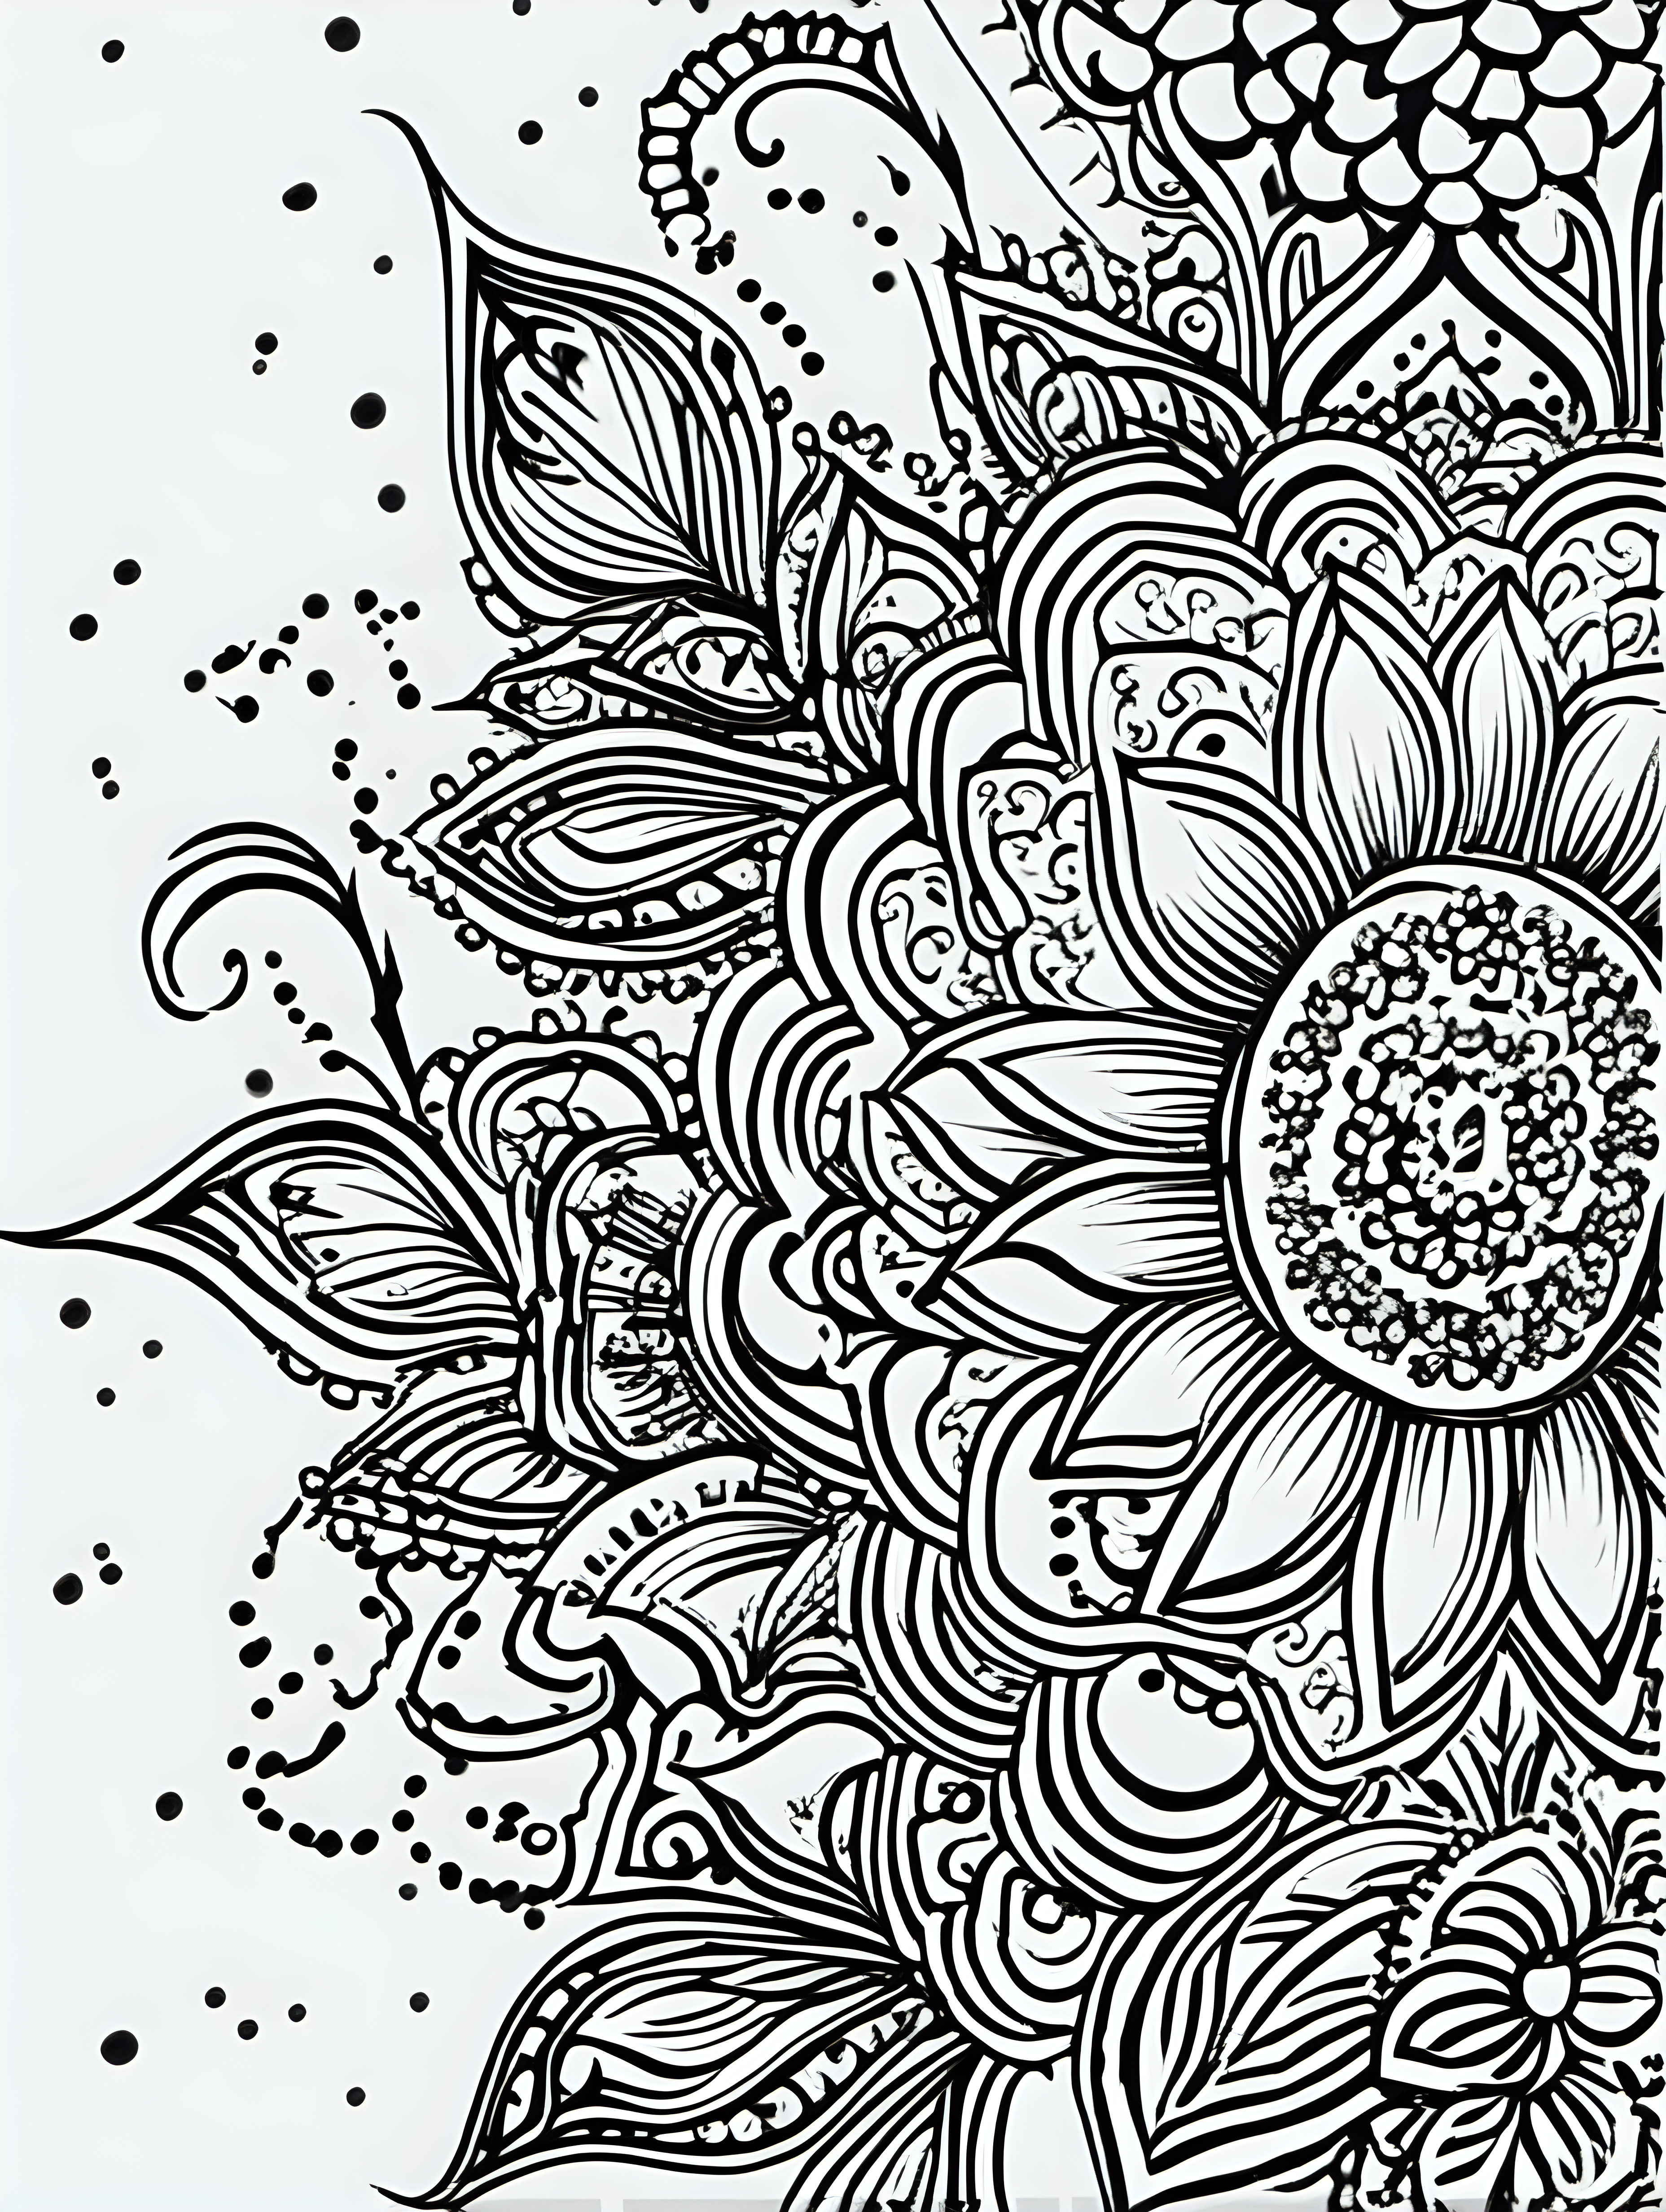 henna patterns , simple draw, no colors, 